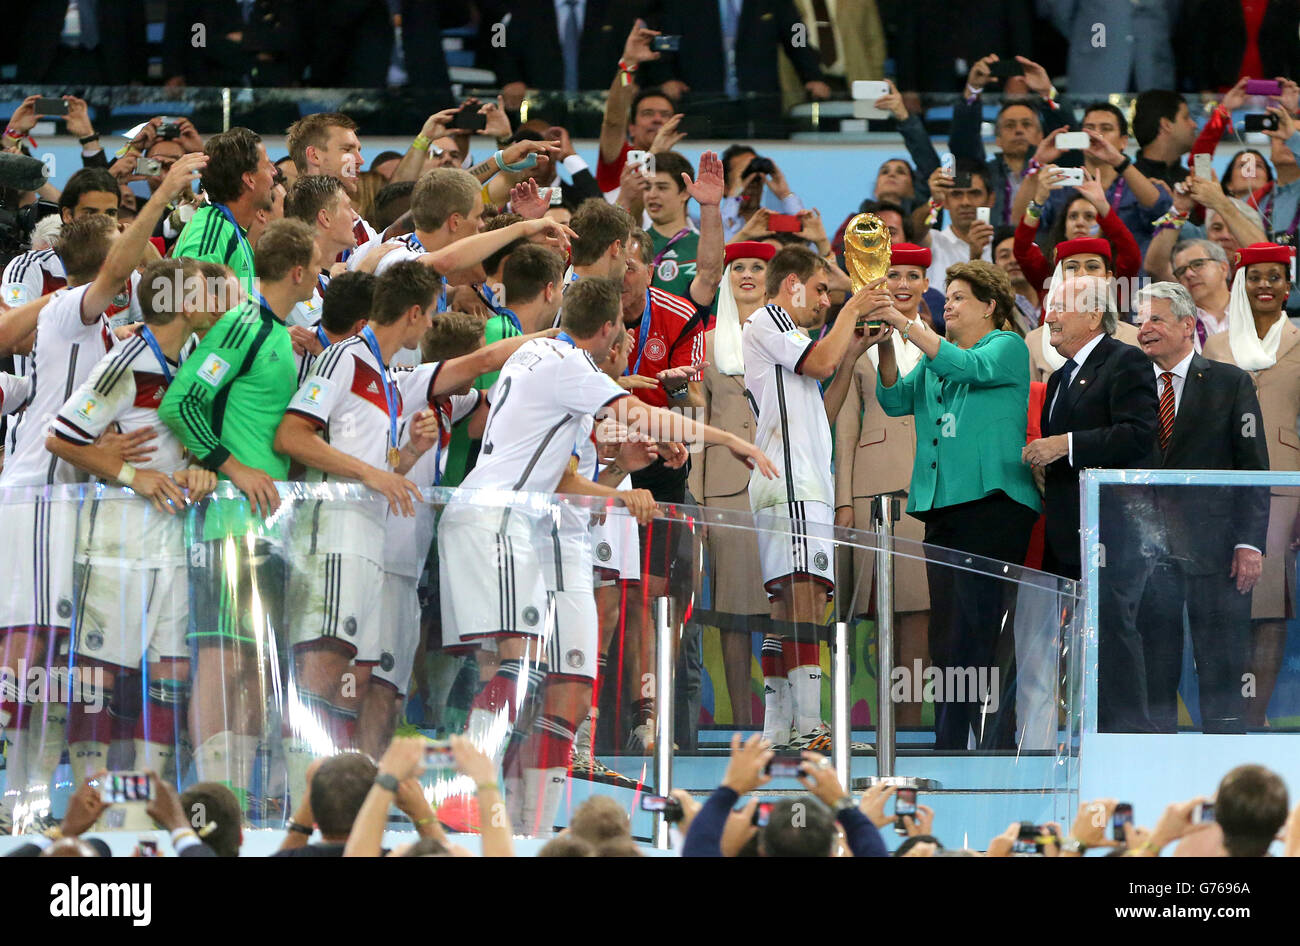 Soccer - FIFA World Cup 2014 - Final - Germany v Argentina - Estadio do Maracana. Germany's Philipp Lahm collects the FIFA World Cup trophy after the game Stock Photo